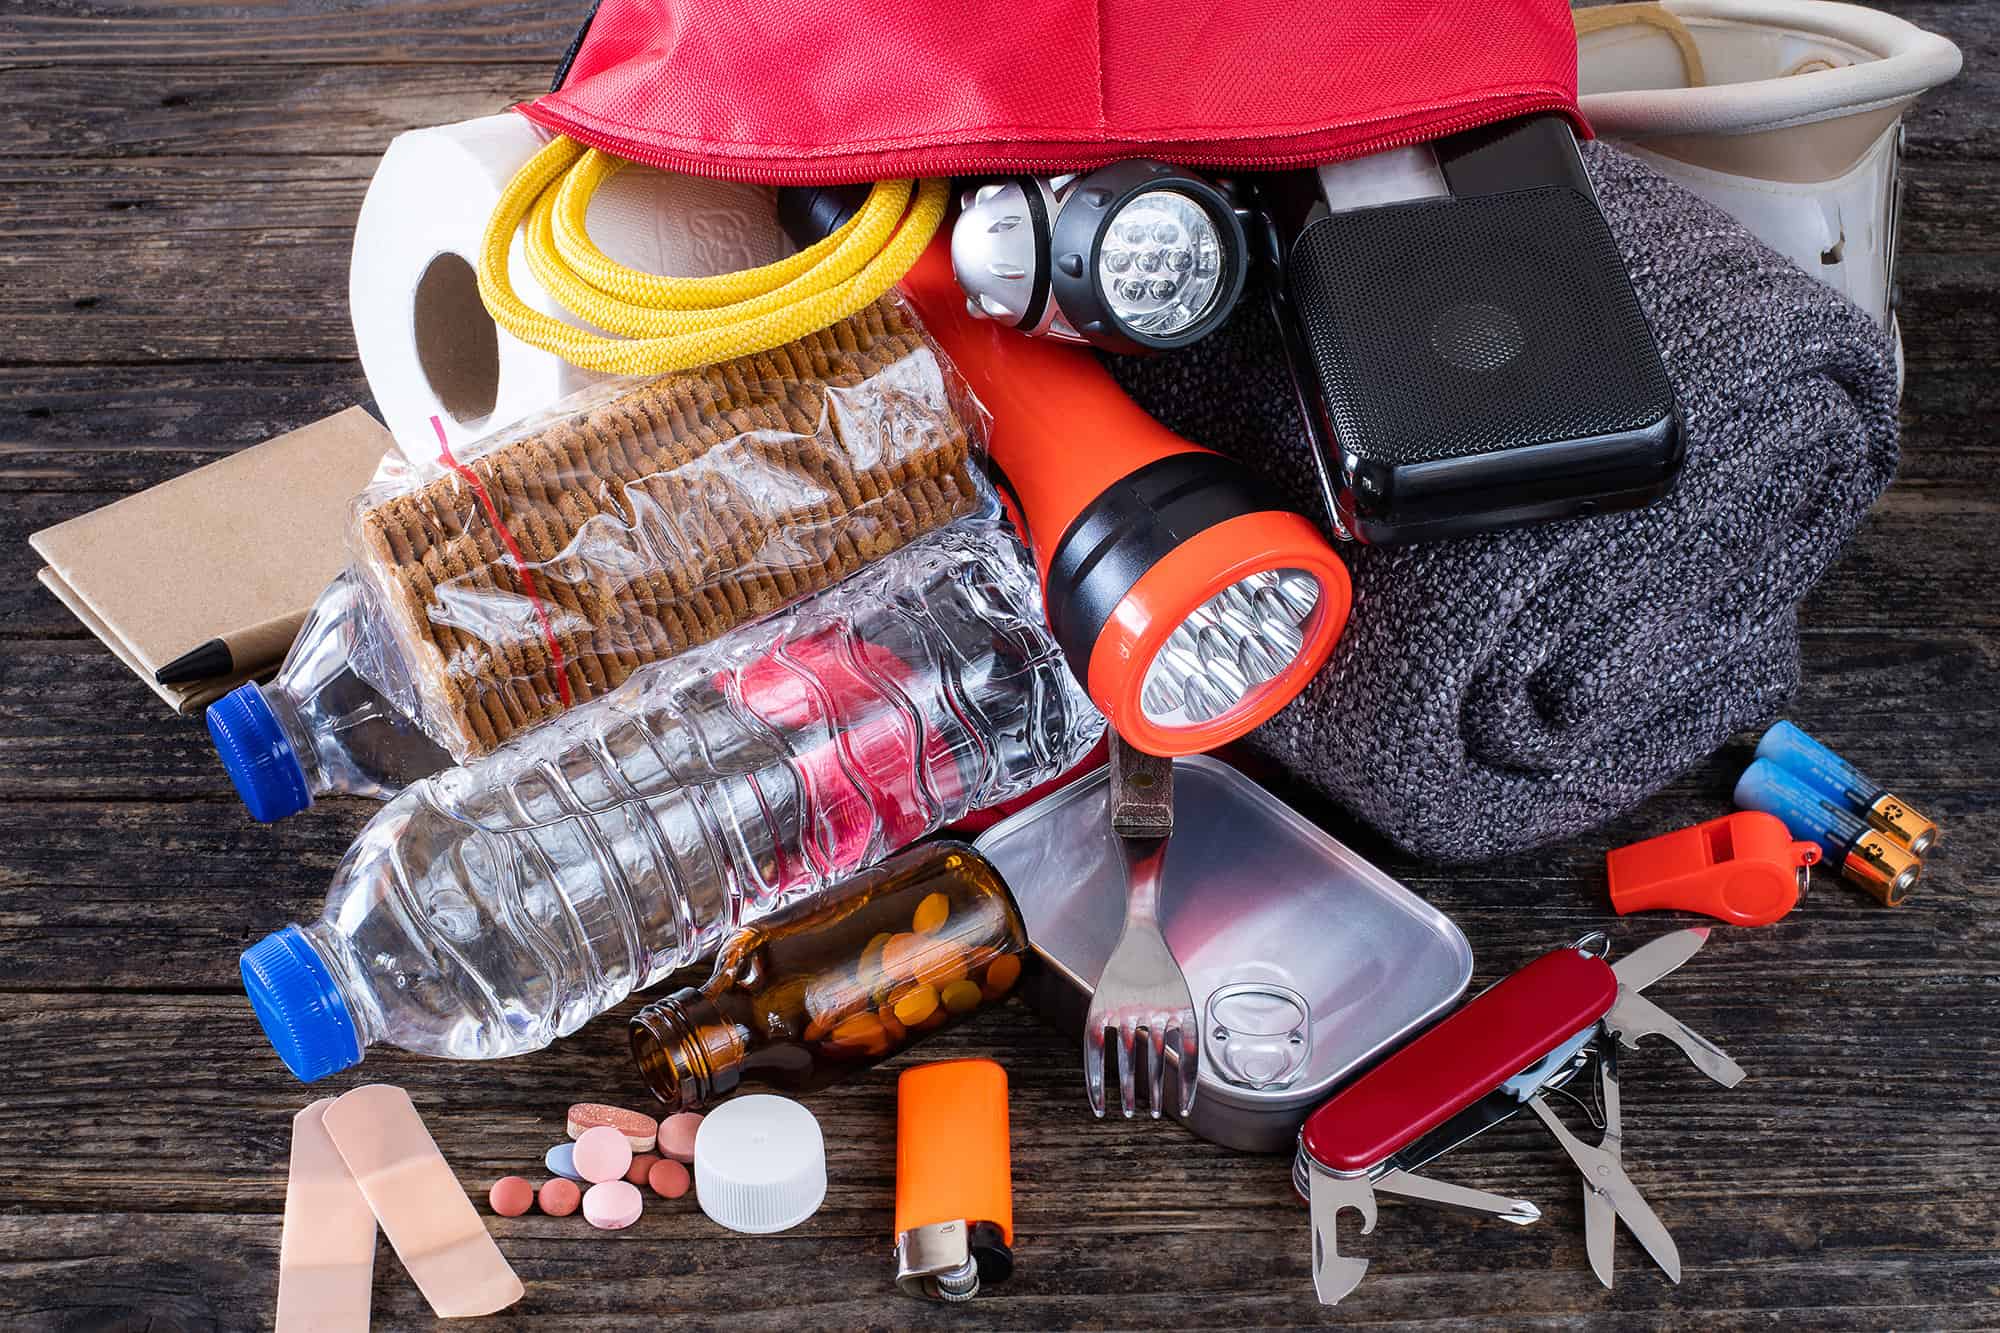 Car Emergency Kit Review: Essential Items for Roadside Safety